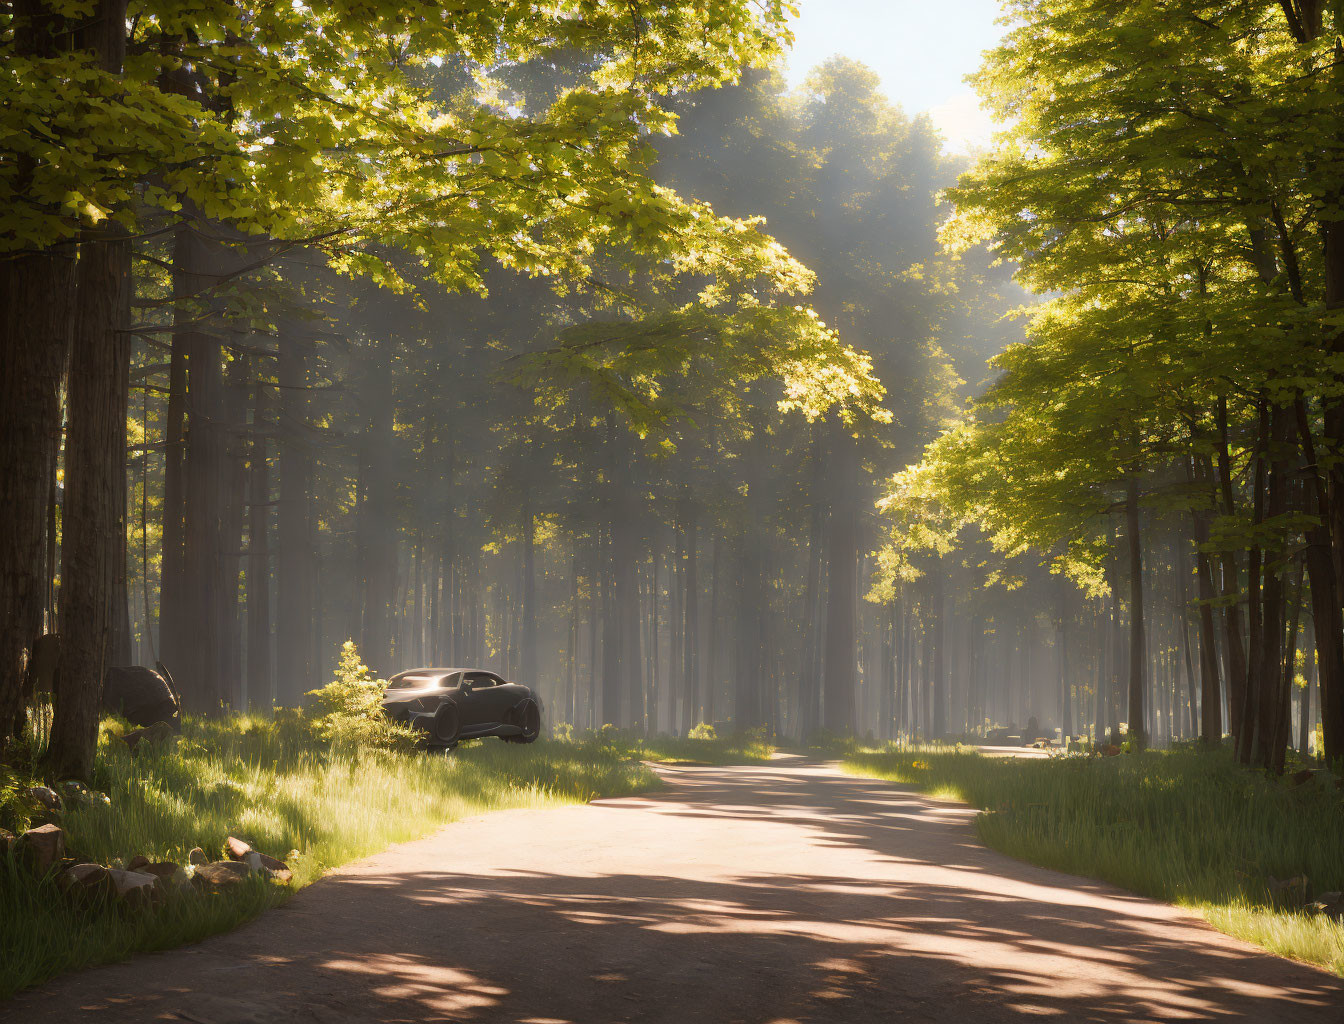 Sunlit Forest Road with SUV Among Tall Trees